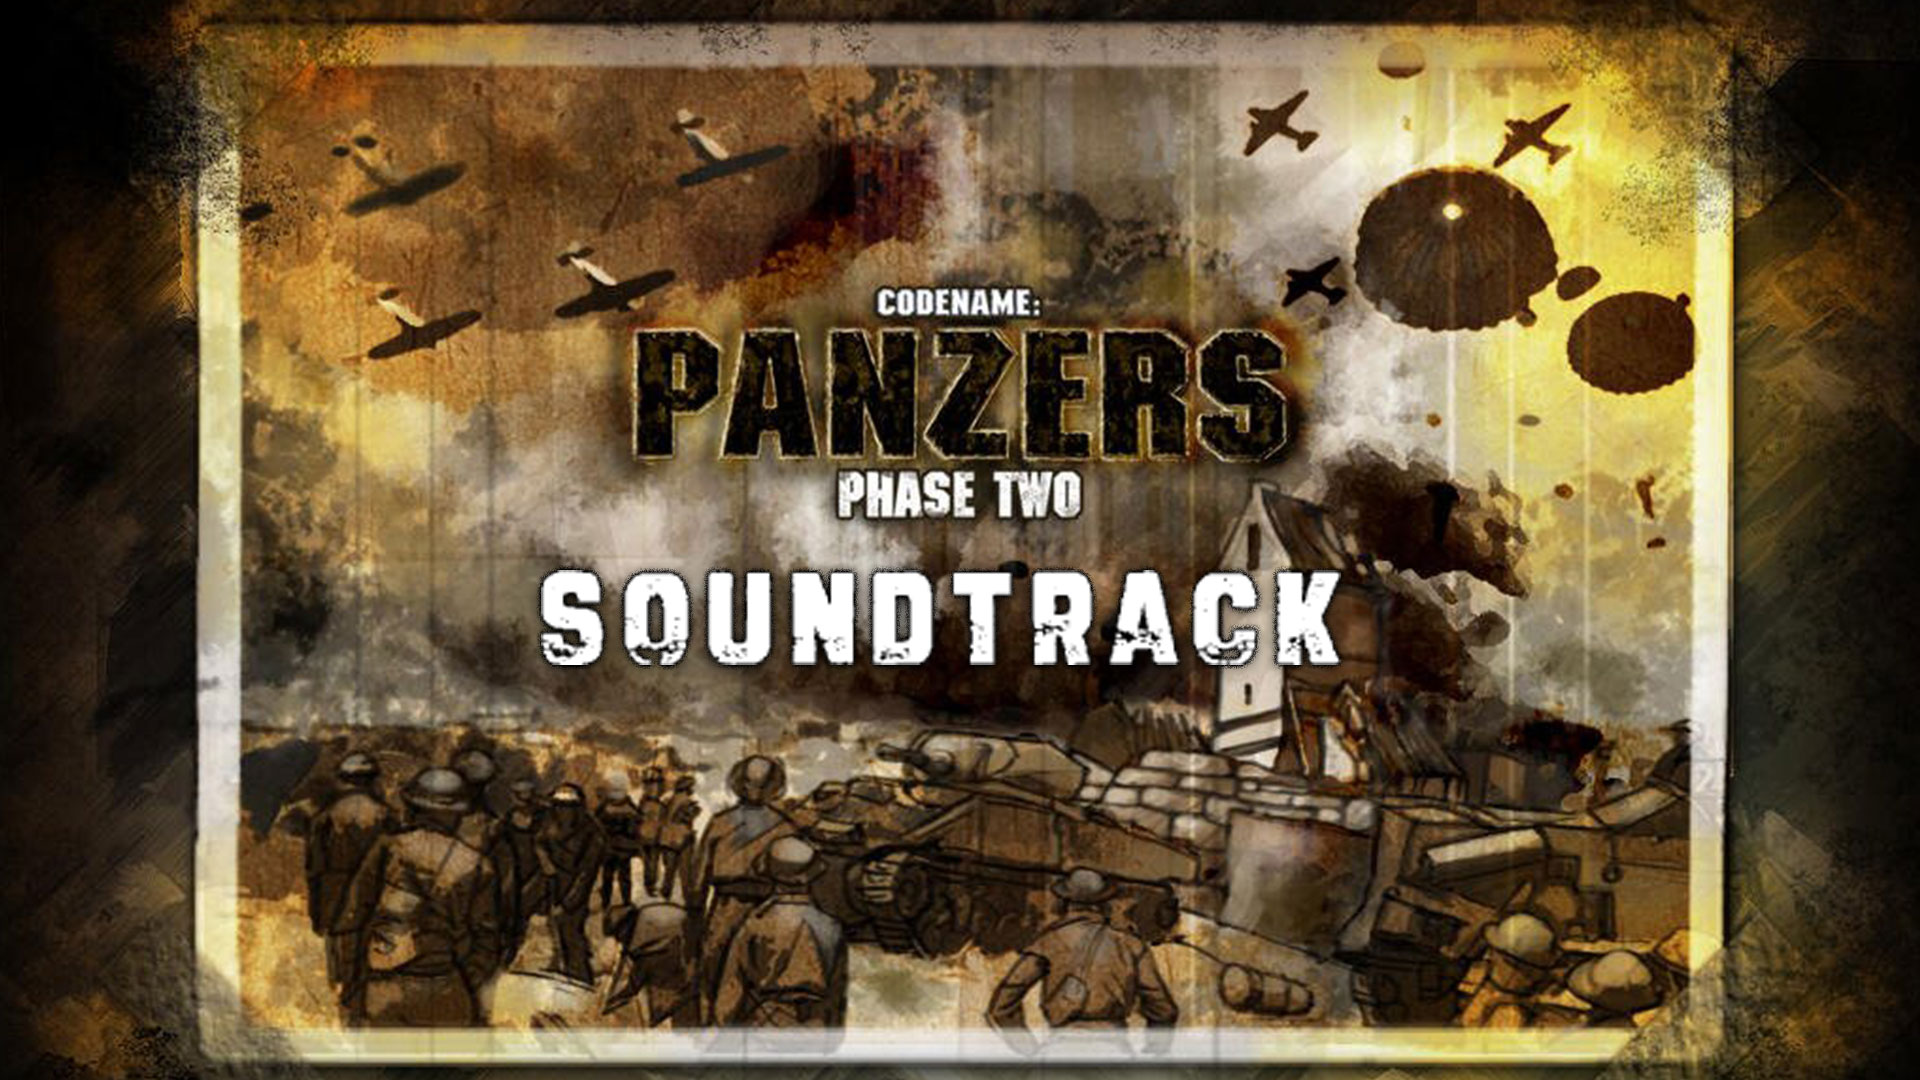 Codename Panzers Phase Two Soundtrack Featured Screenshot #1